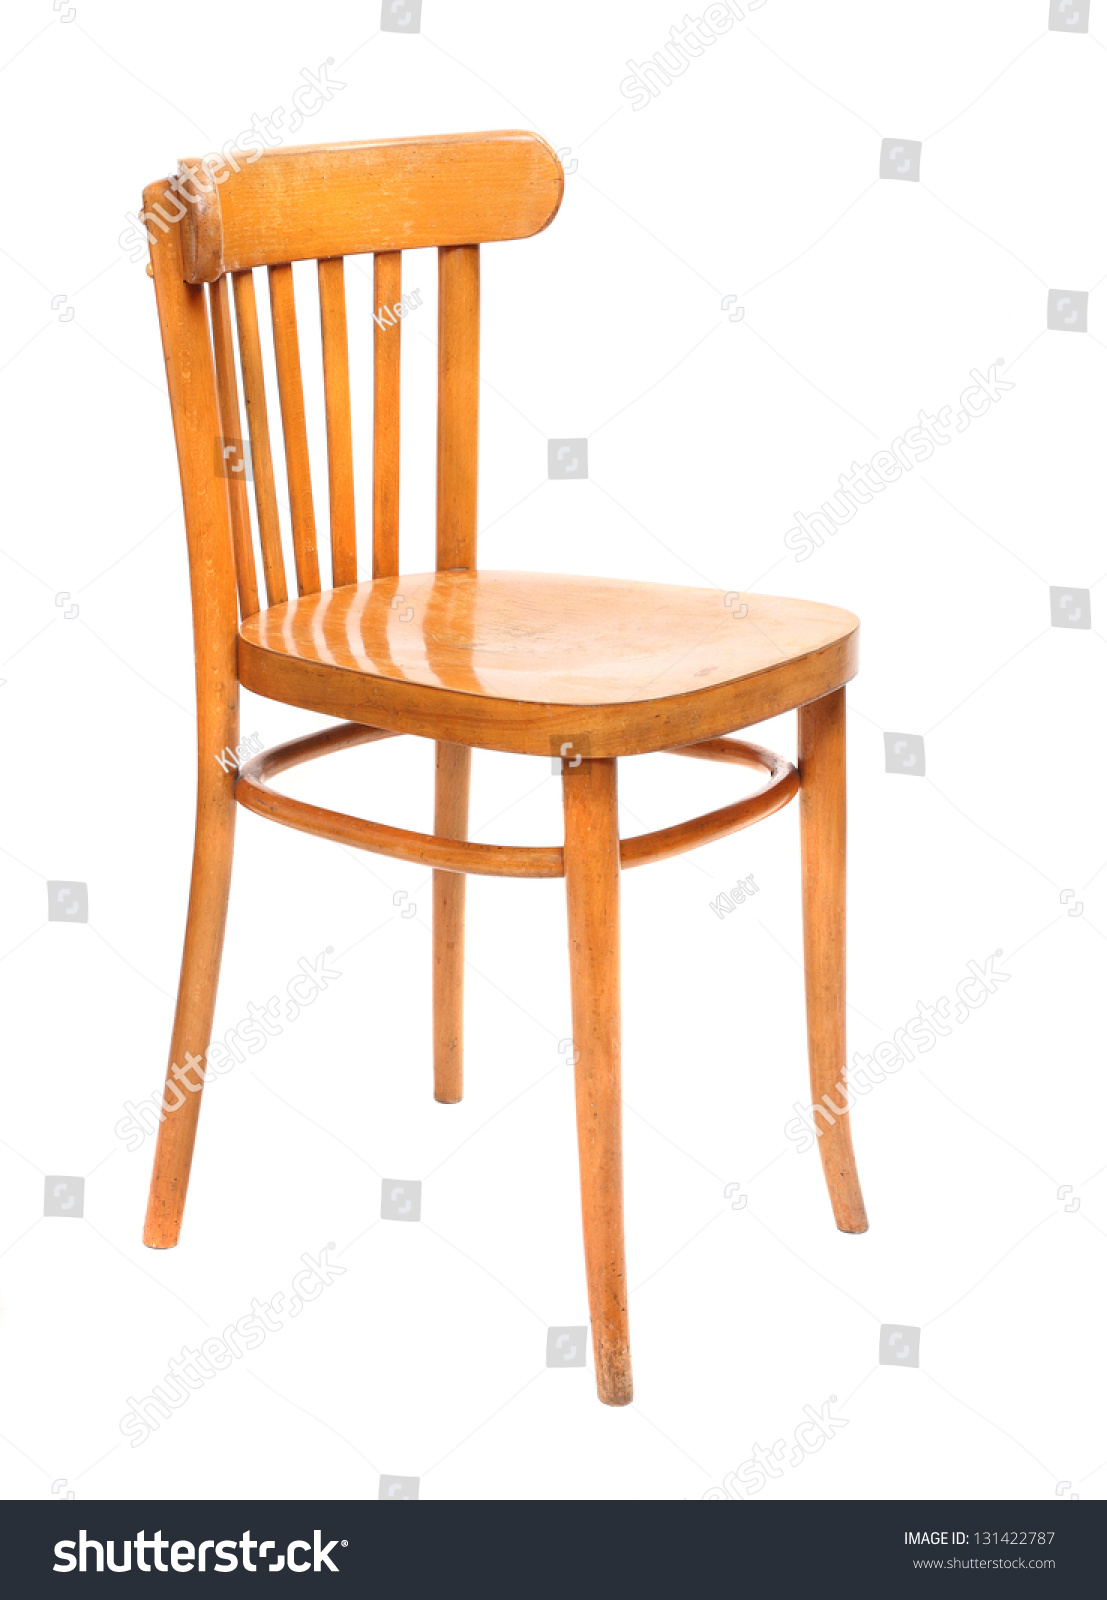 Classic wooden chair on a white background. #131422787